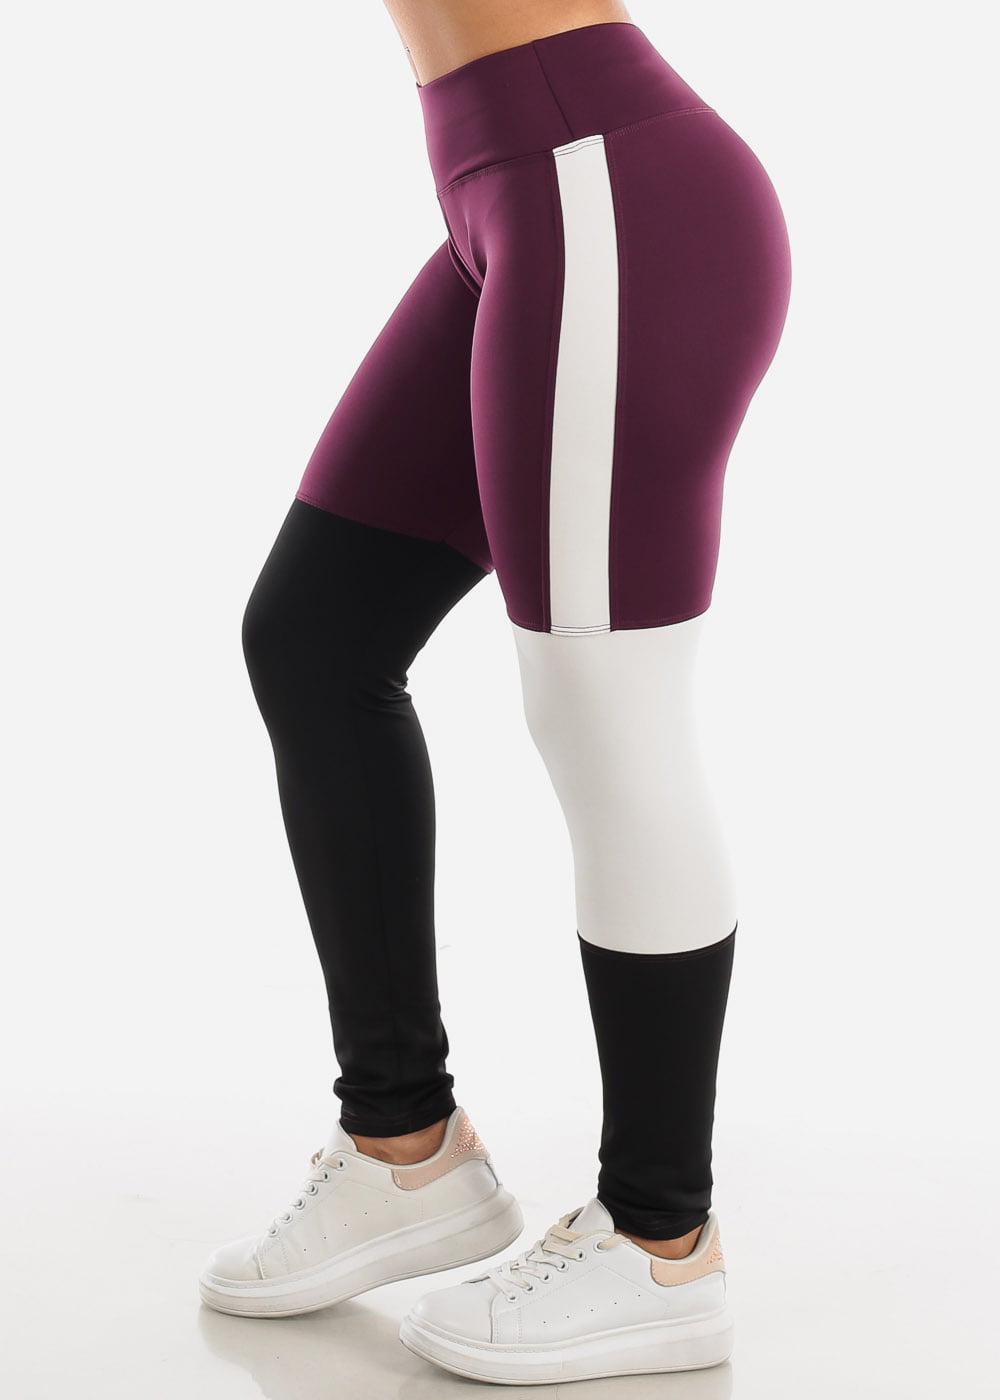 Simple Purple workout leggings for Gym